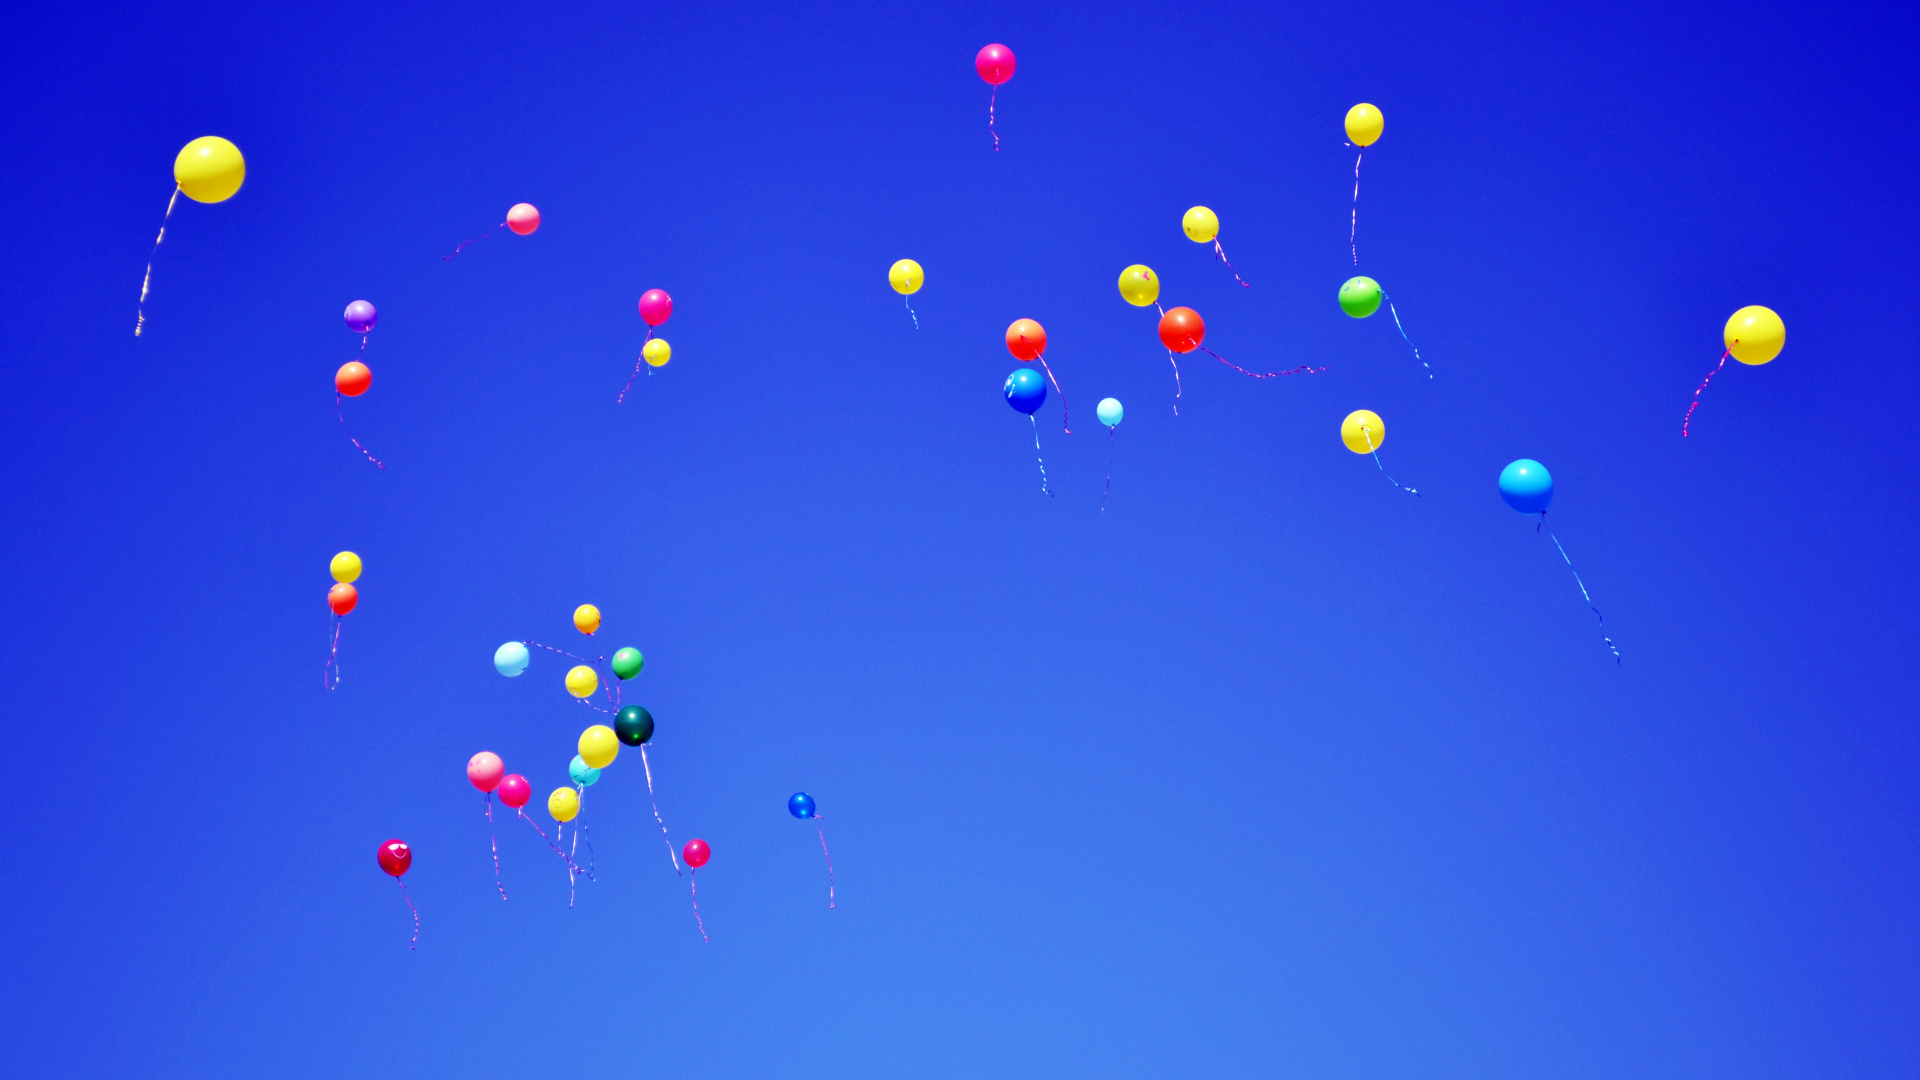 Red Blue and Yellow Balloons in The Sky. Wallpaper in 1920x1080 Resolution